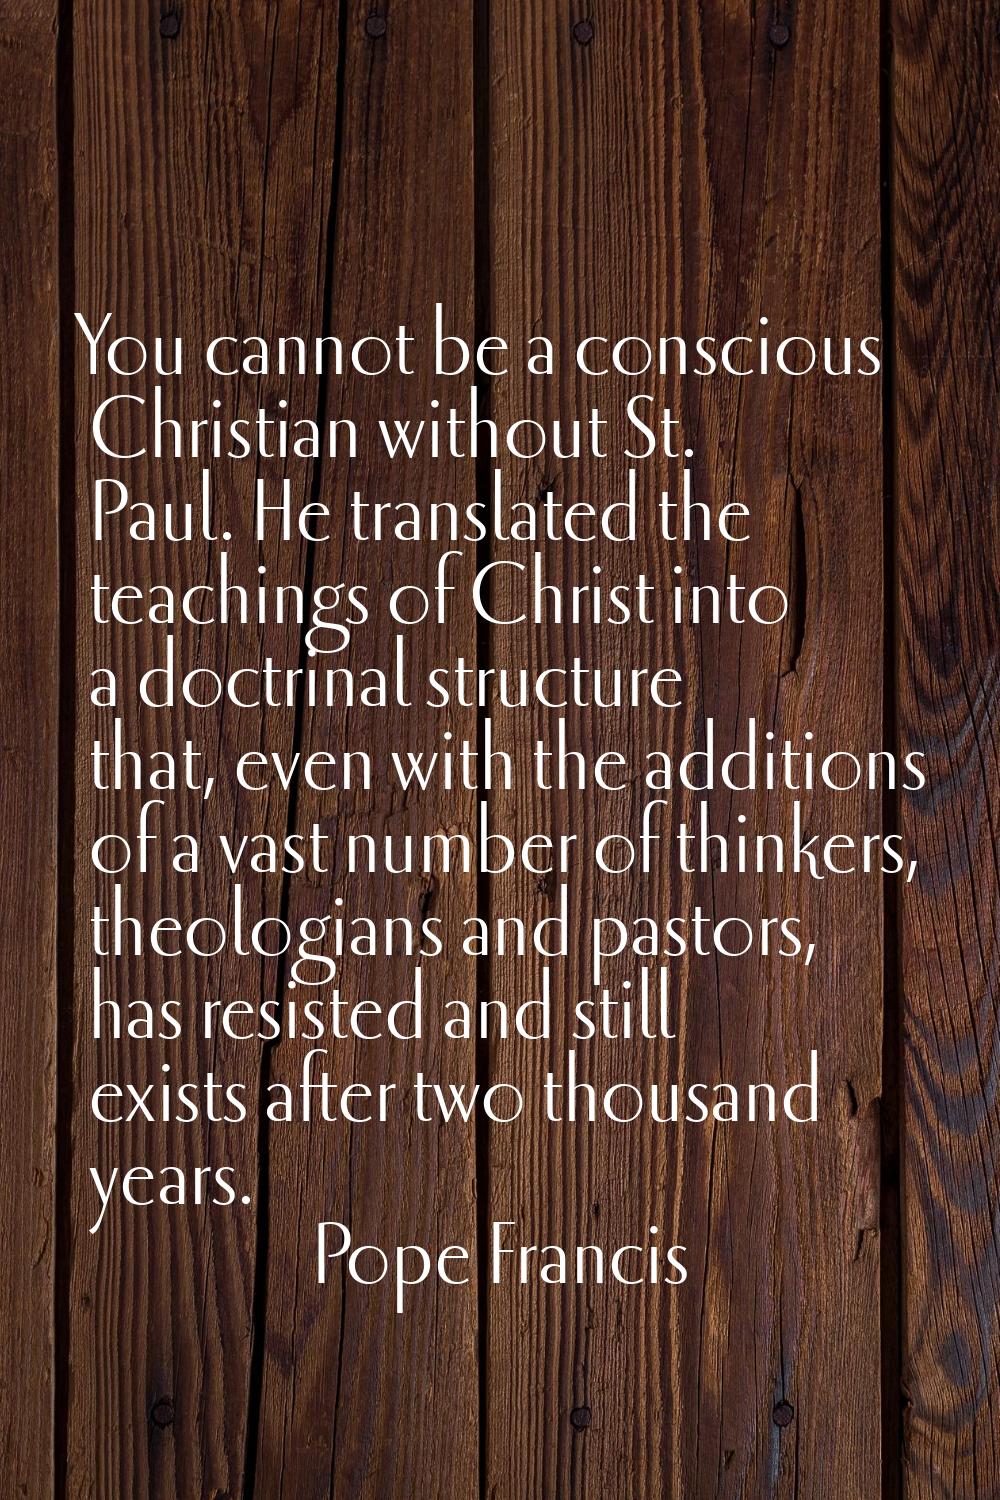 You cannot be a conscious Christian without St. Paul. He translated the teachings of Christ into a 